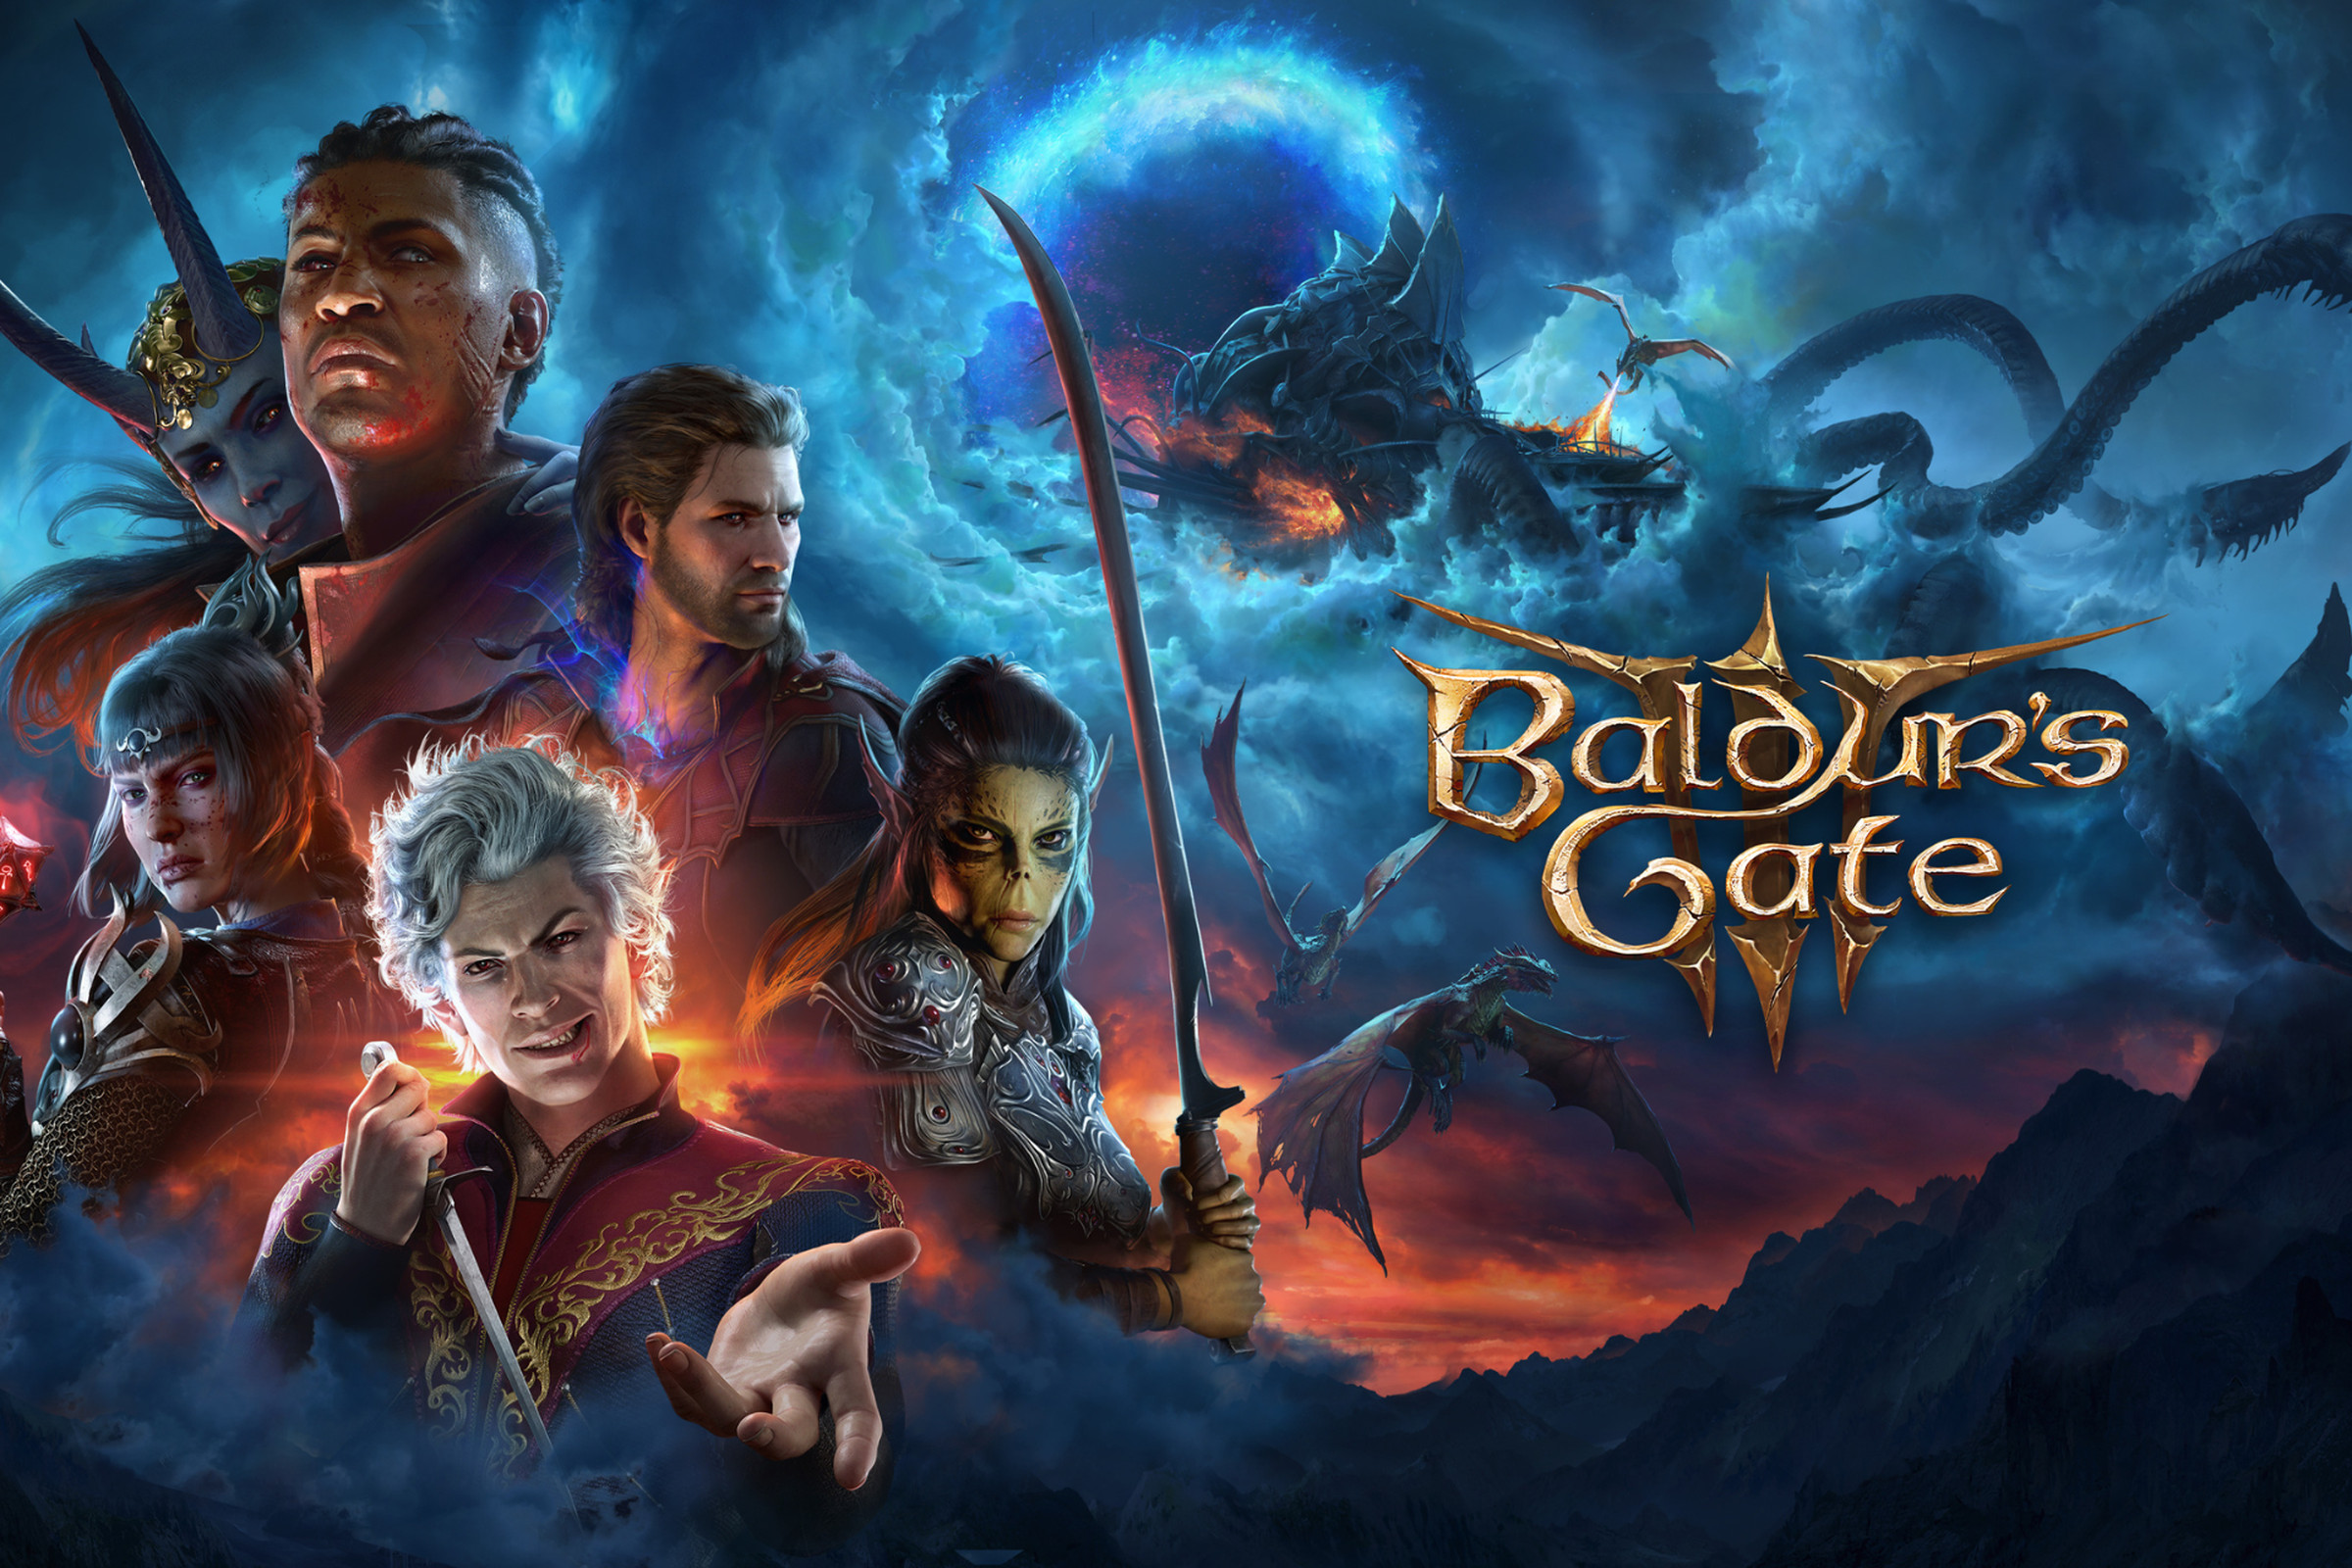 Key art for Baldur’s Gate 3 featuring a composite of five of the game’s companions with a dark blue sky background with the Baldur’s Gate 3 logo to the right.